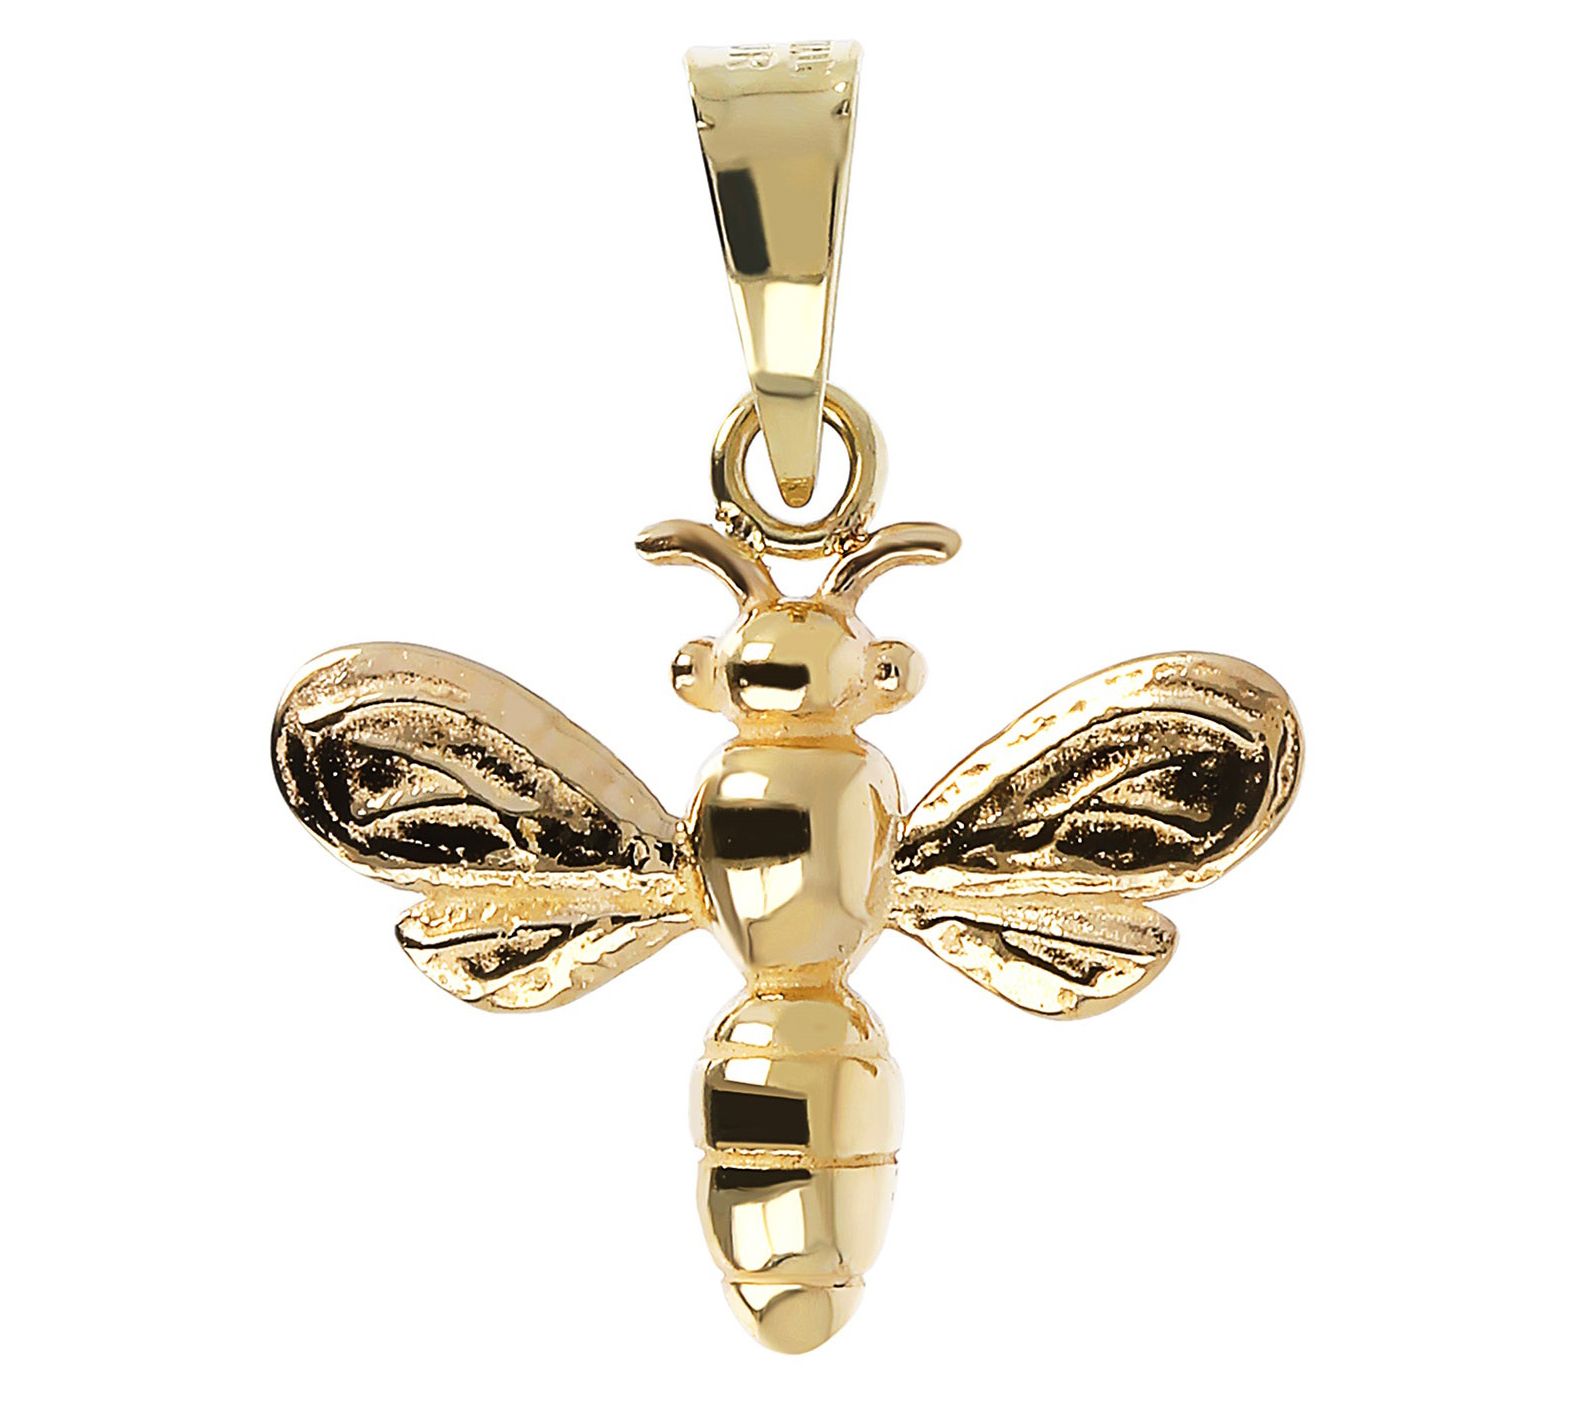 Details about   14k 14kt Yellow Gold 3-Dimensional Honey Bee Pendant 21mm X 13mm